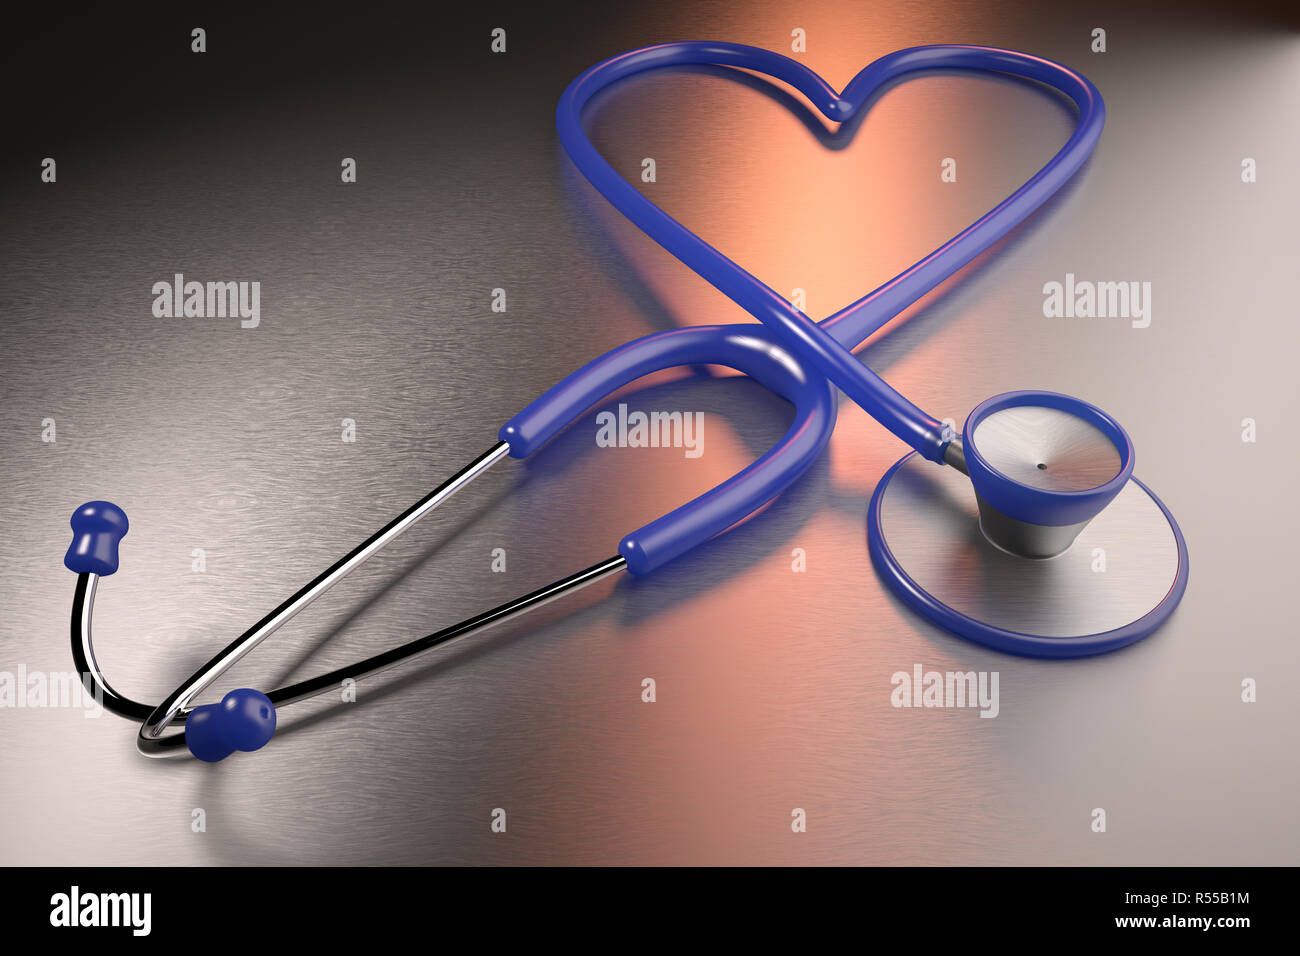 Five microscope They are 3D rendering of a heart health concept represented with a heart shaped  stethoscope Stock Photo - Alamy